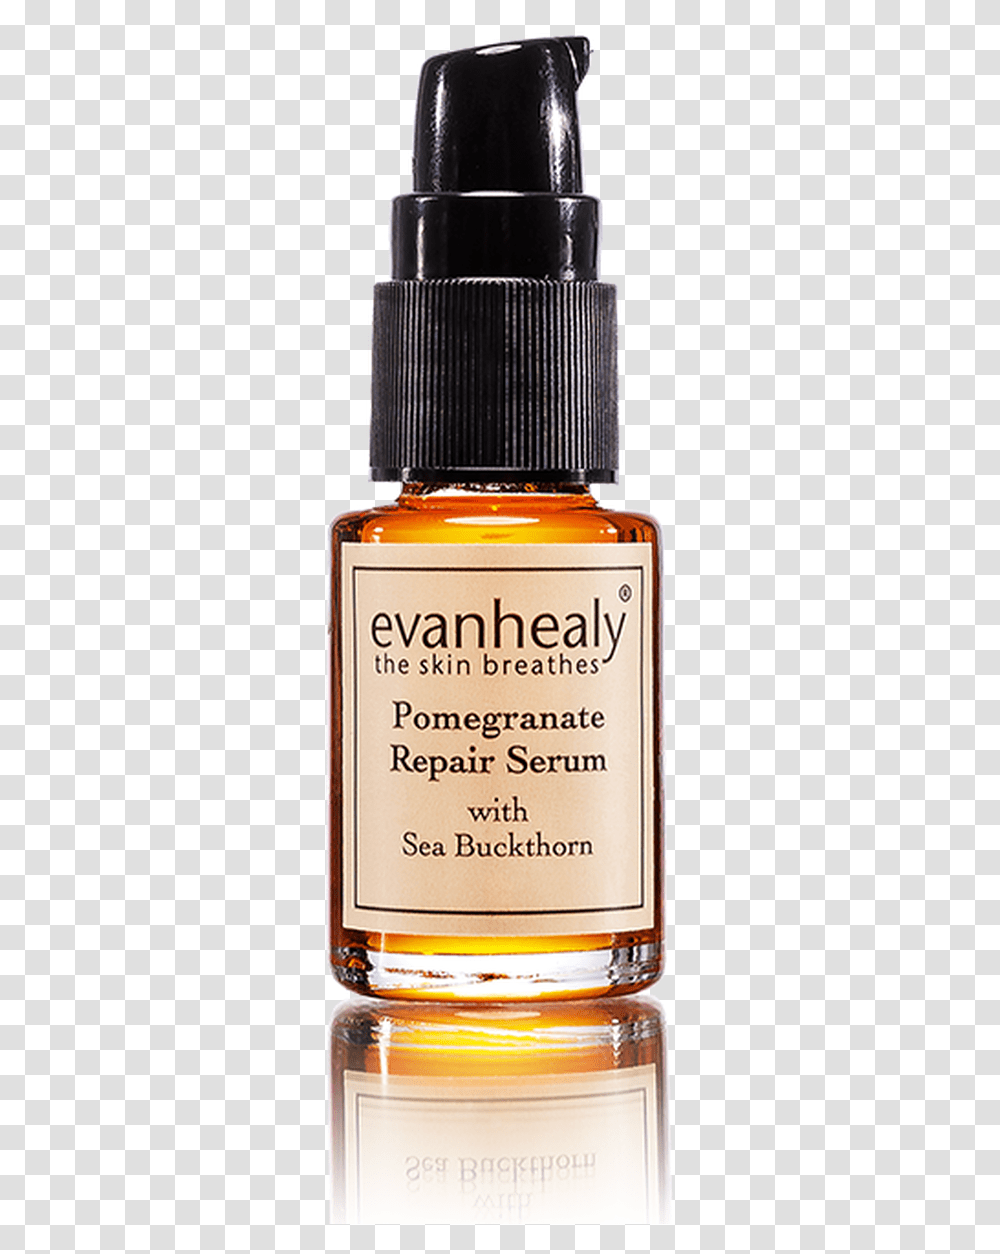 Evanhealy Rose Serum, Bottle, Cosmetics, Aftershave, Perfume Transparent Png